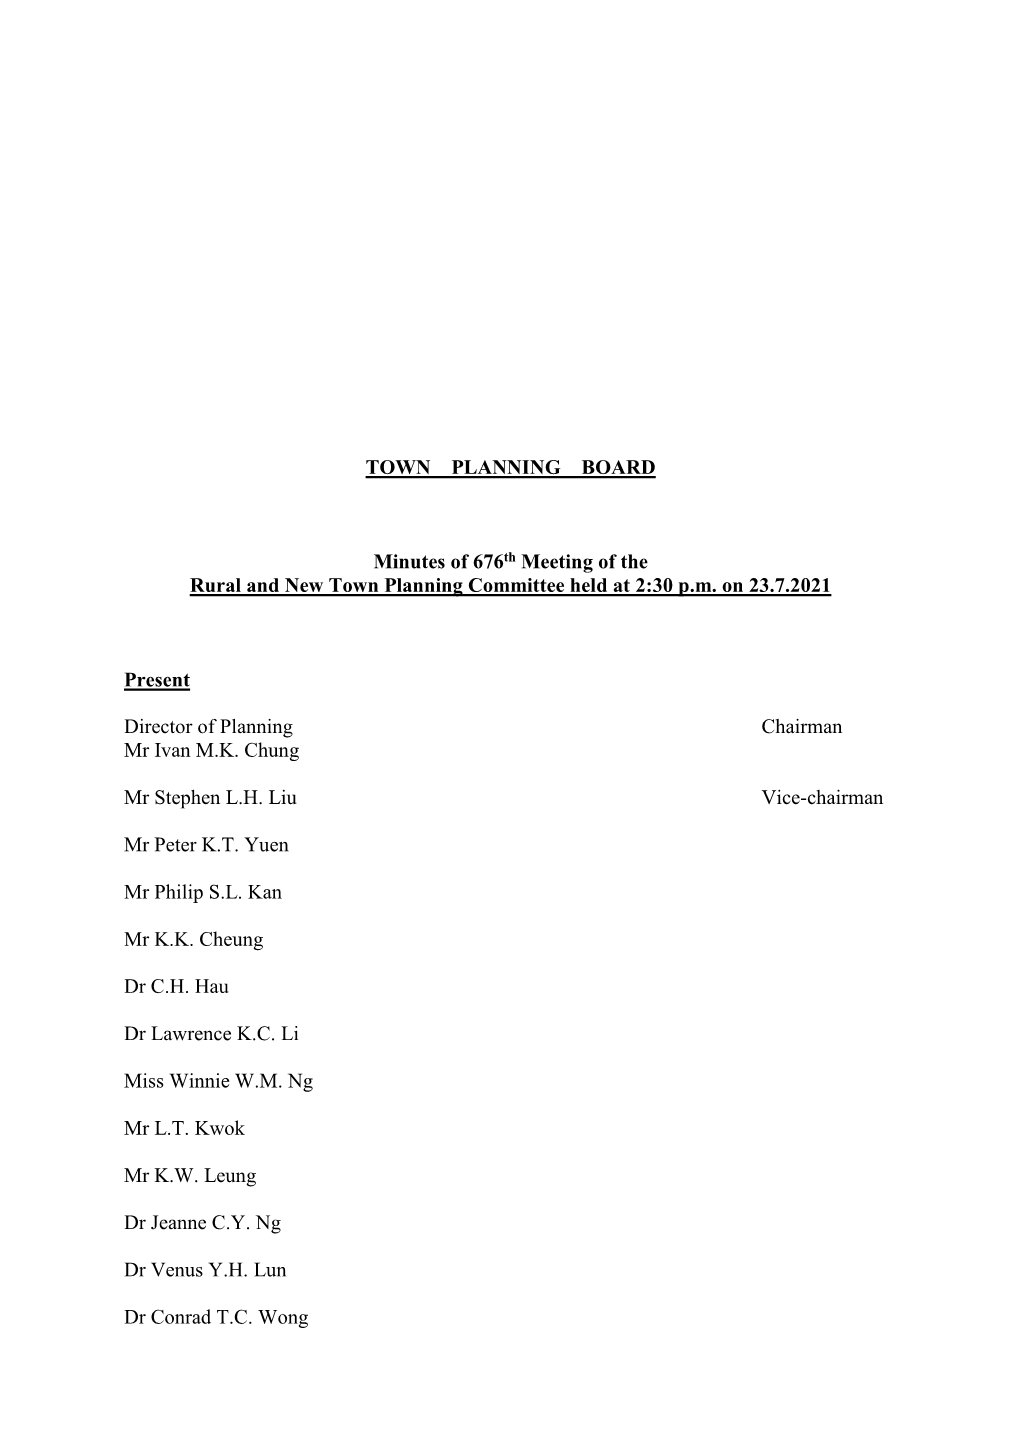 Minutes of 676Th Meeting of the Rural and New Town Planning Committee Held at 2:30 P.M